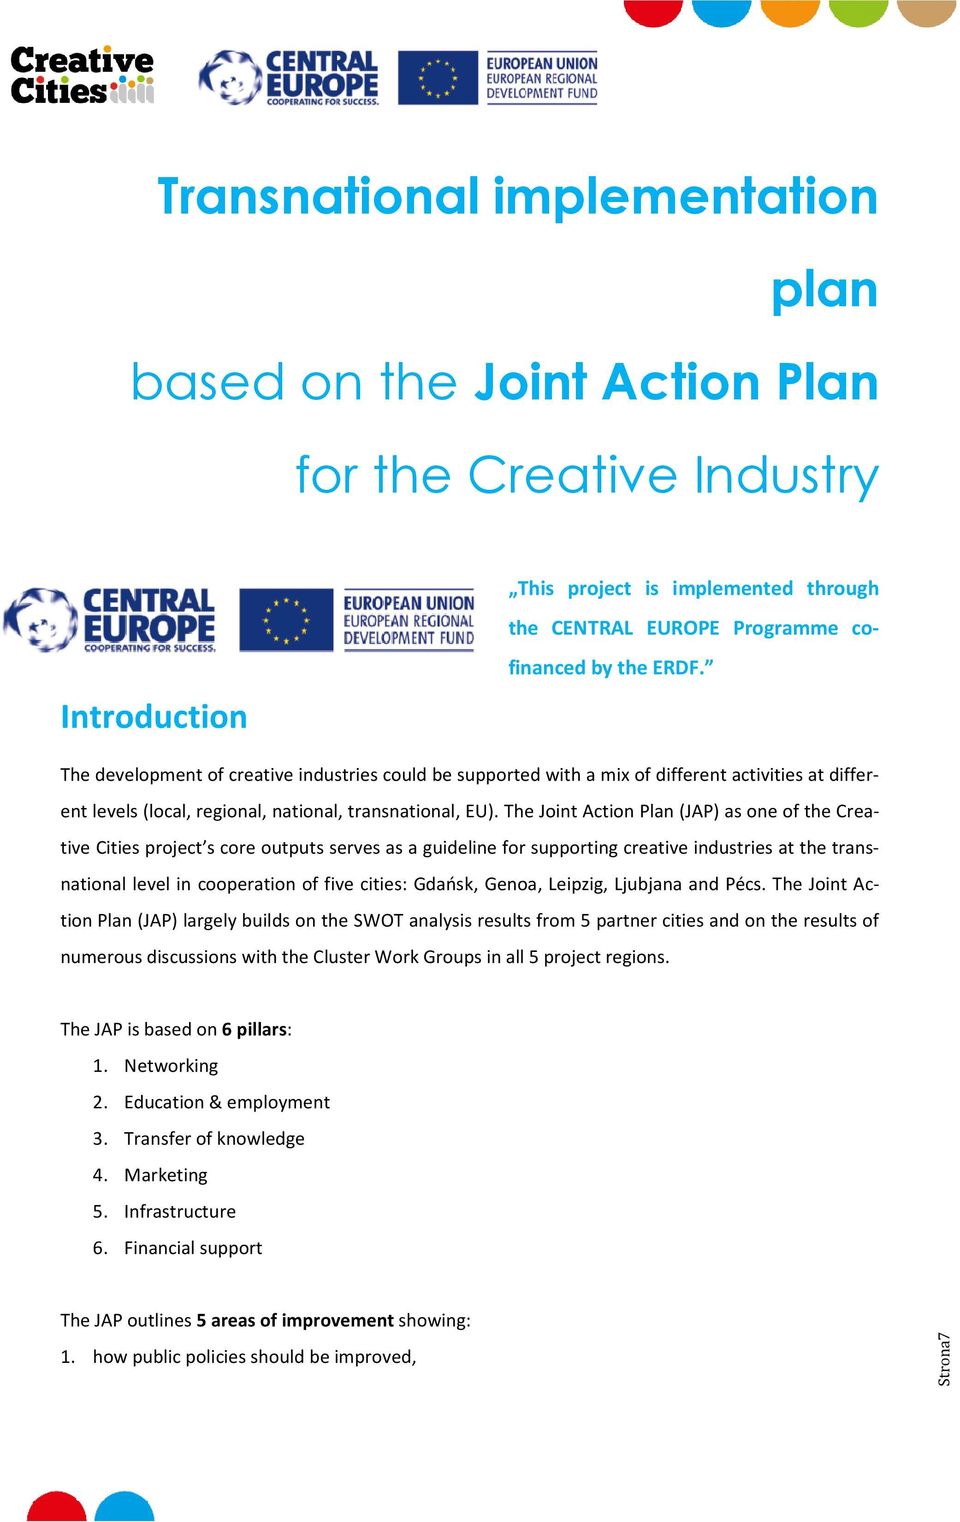 The Joint Action Plan (JAP) as one of the Creative Cities project s core outputs serves as a guideline for supporting creative industries at the transnational level in cooperation of five cities: